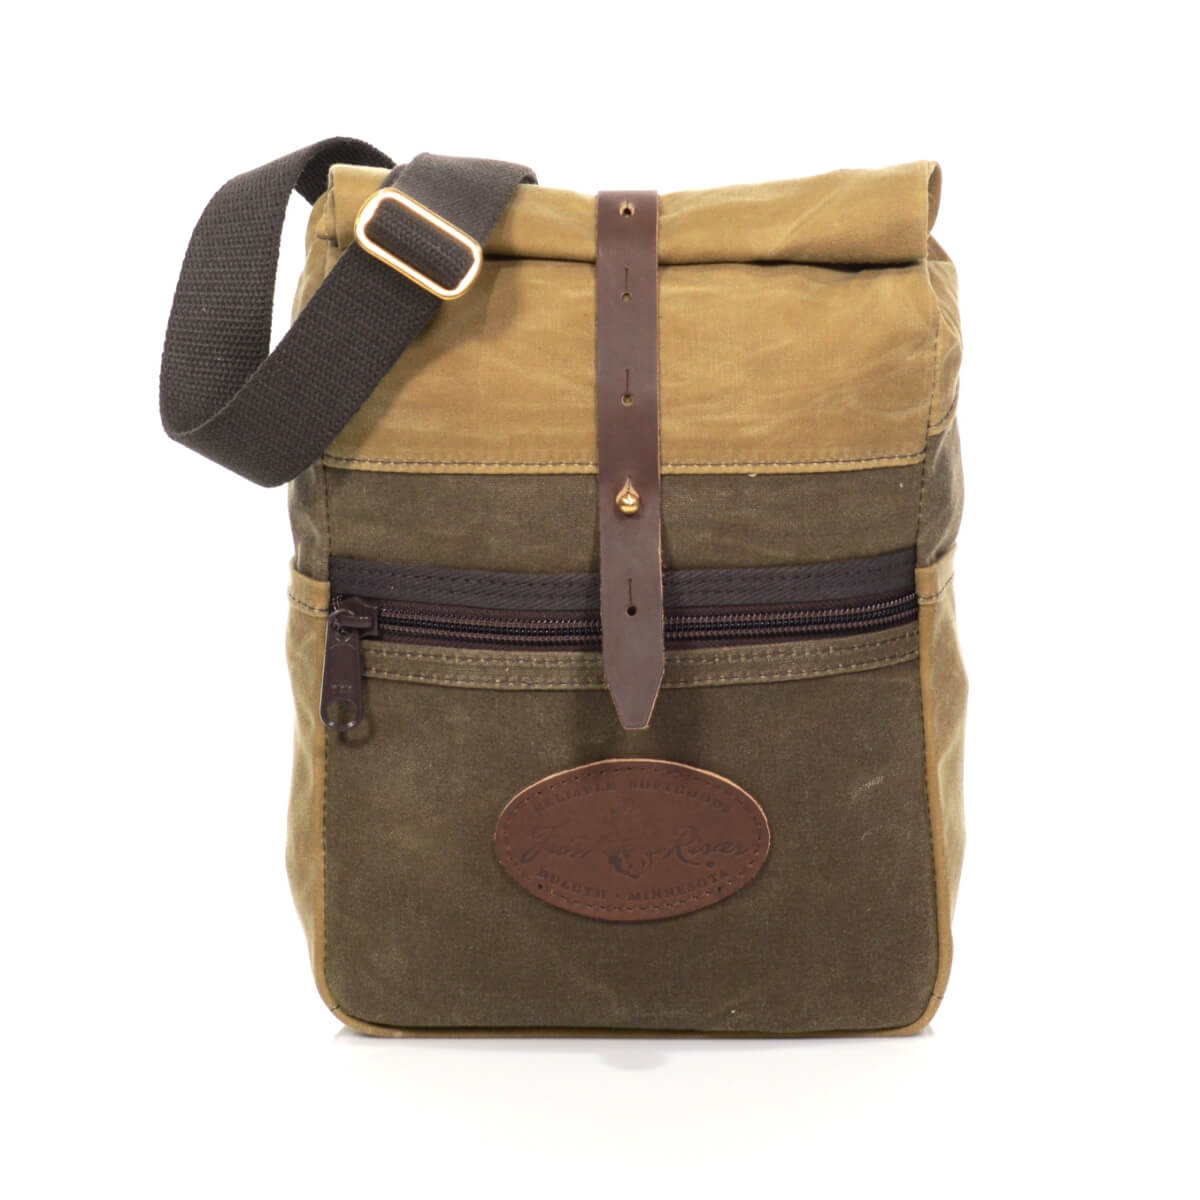 Frost River Bushcraft Packs, Messenger Bags, Waxed Canvas Luggage ...